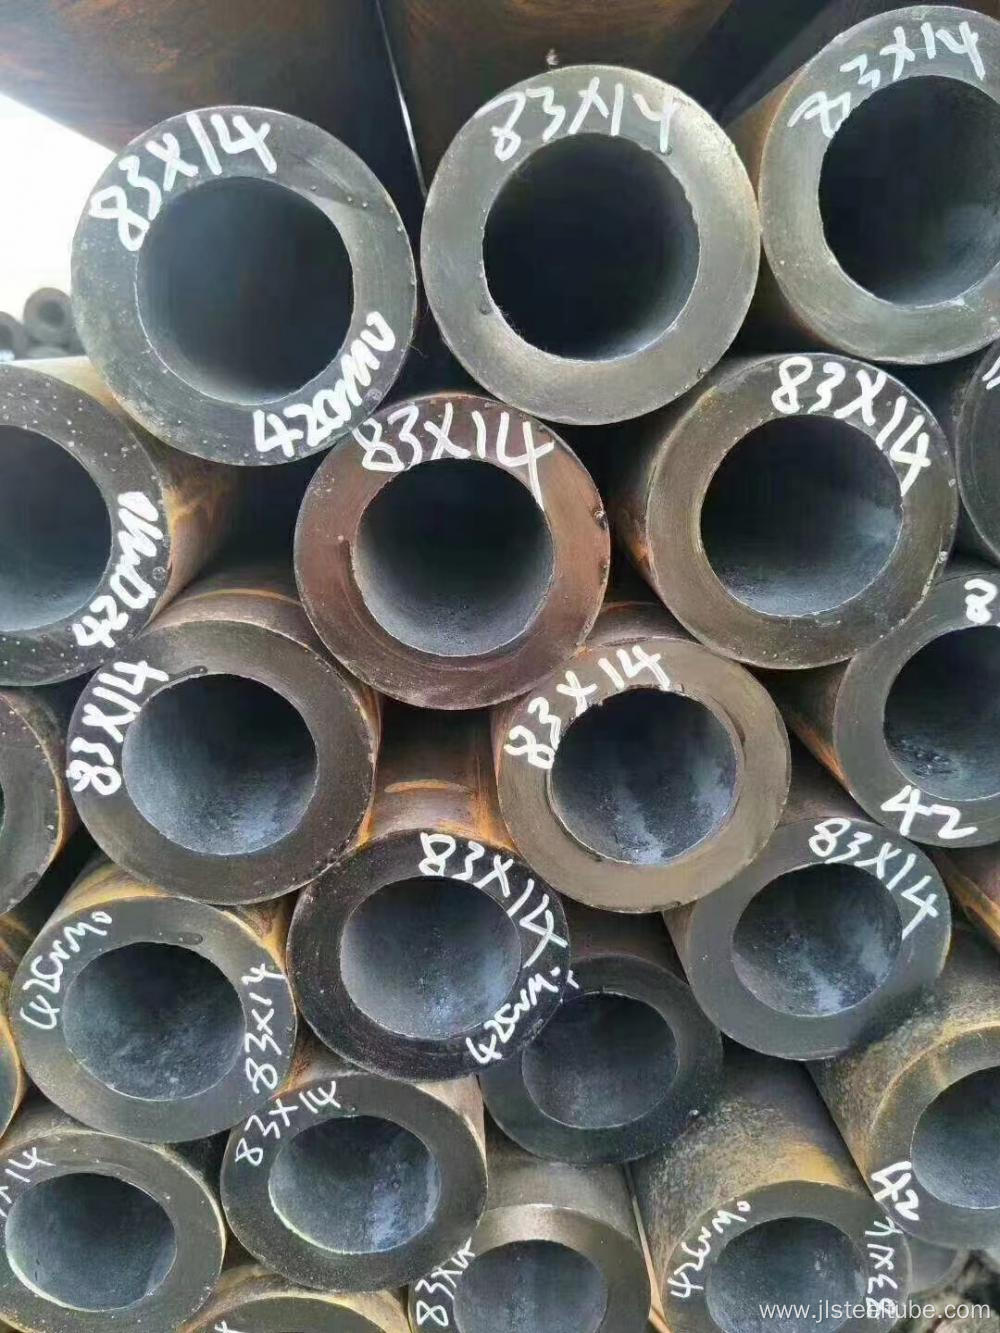 Supply of galvanized seamless steel pipes